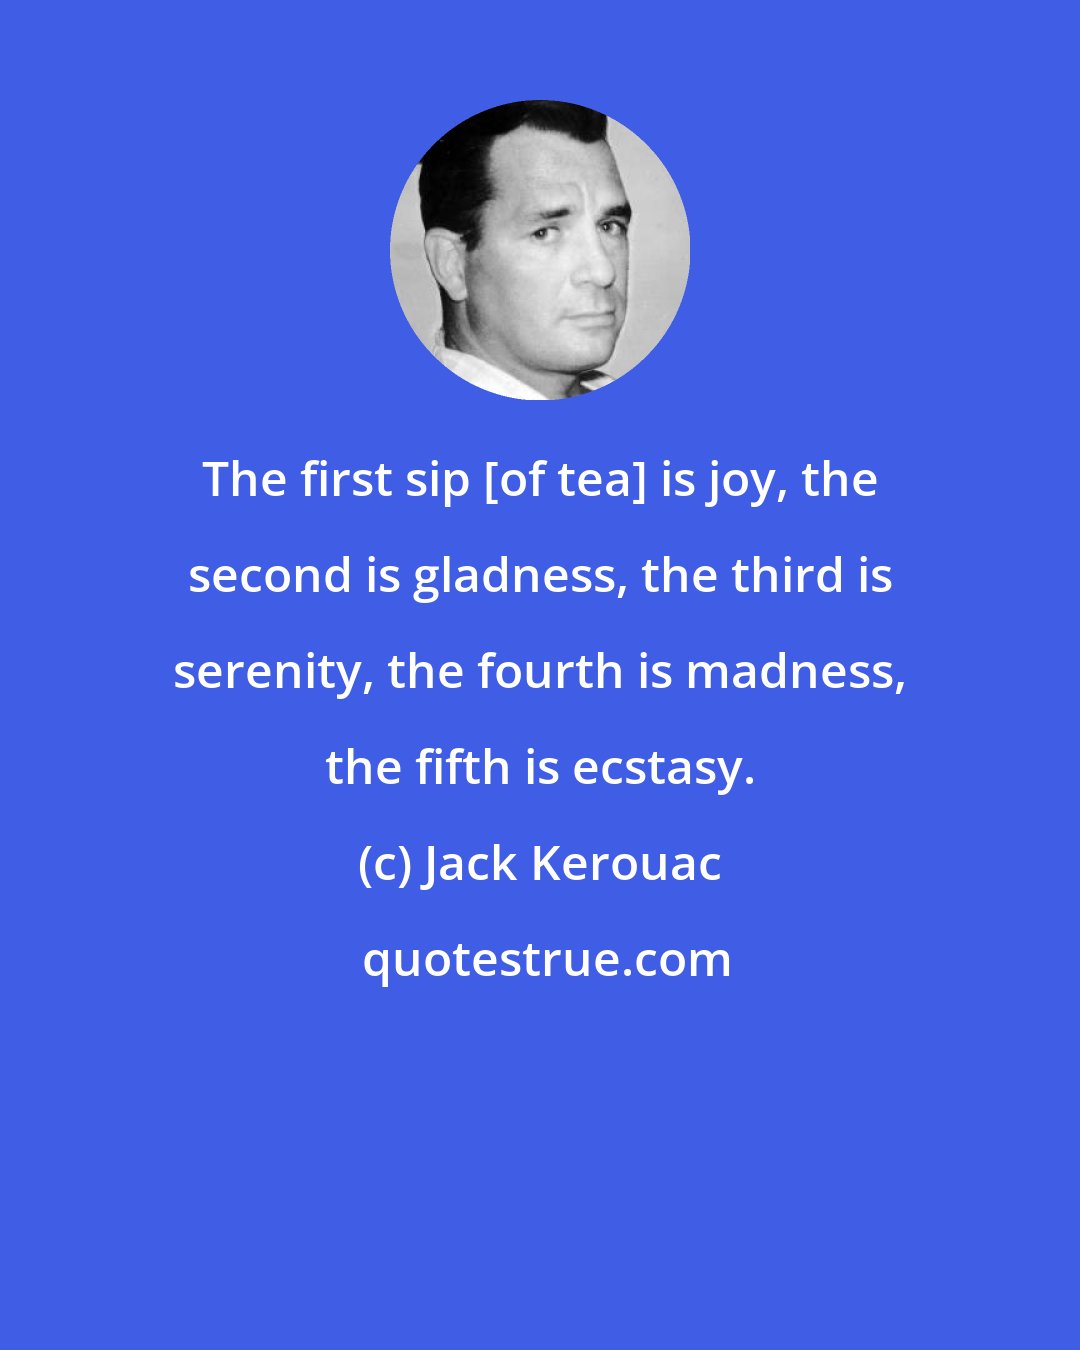 Jack Kerouac: The first sip [of tea] is joy, the second is gladness, the third is serenity, the fourth is madness, the fifth is ecstasy.